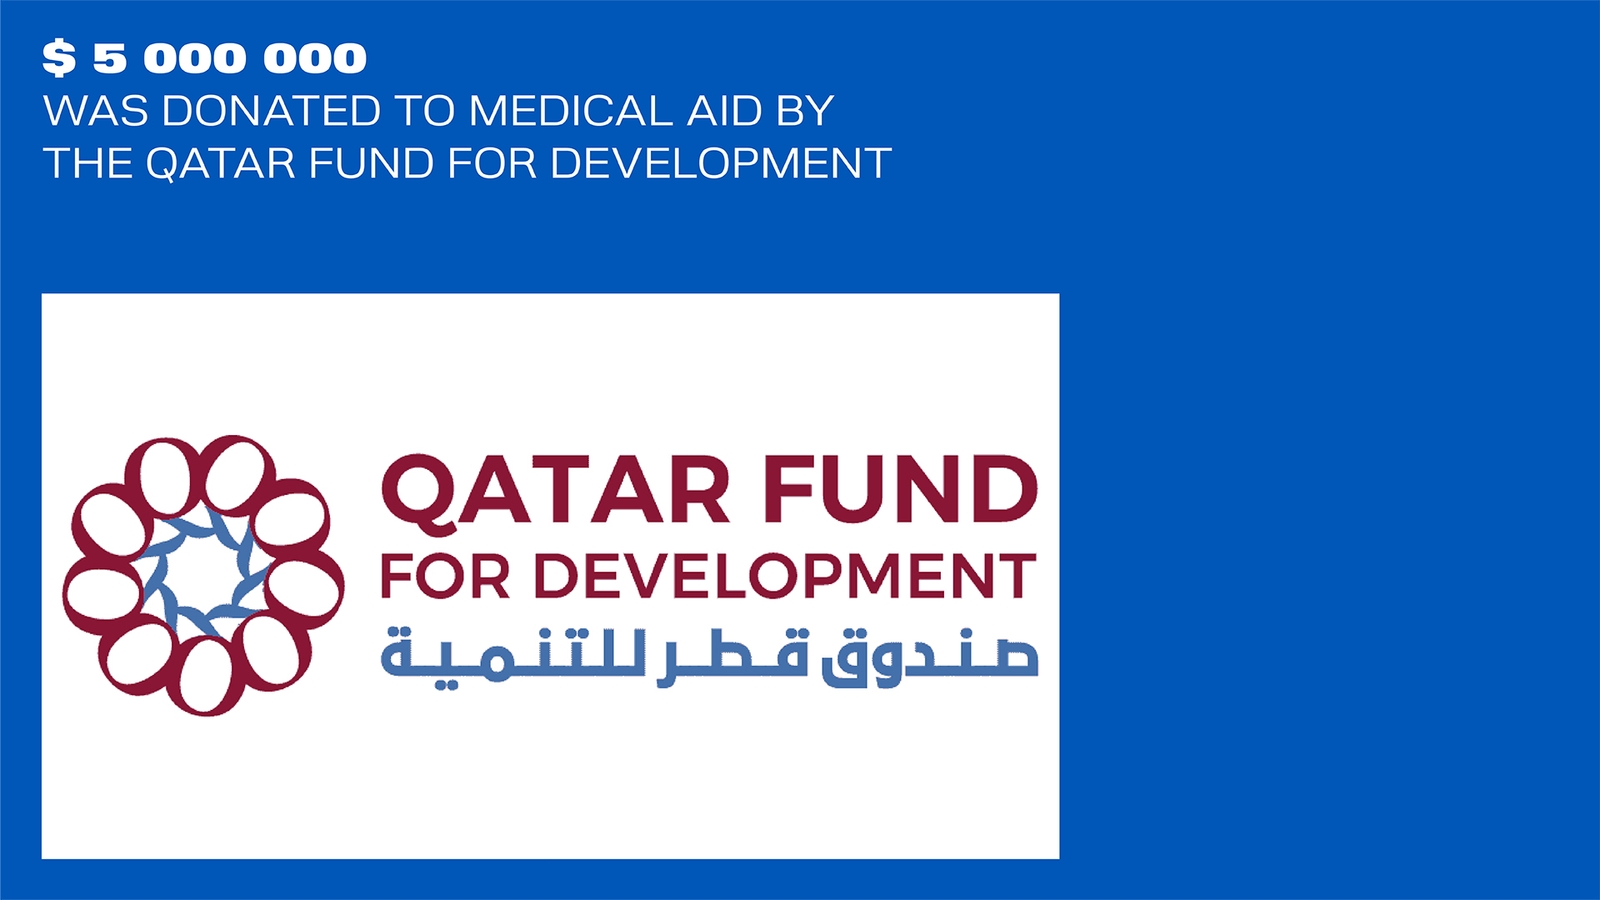 The Qatar Fund for Development Has Transferred $5,000,000 for Medical Aid to Ukraine